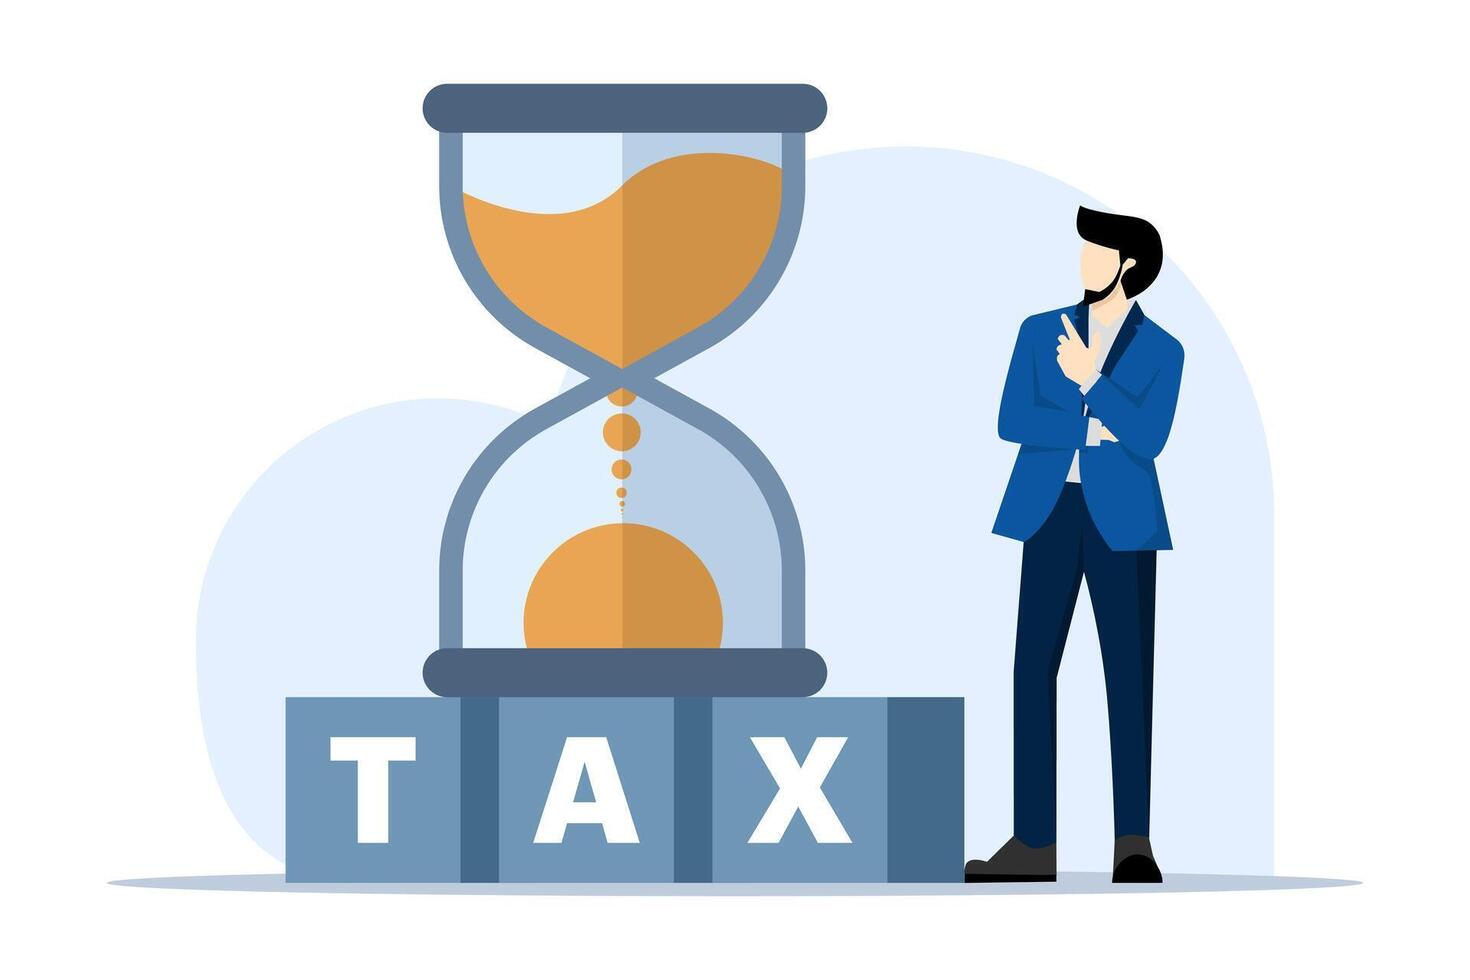 Countdown time for tax deadline concept, hourglass or sandglass on wooden cube block with letters TAX with character standing looking at hourglass, flat vector illustration on white background.